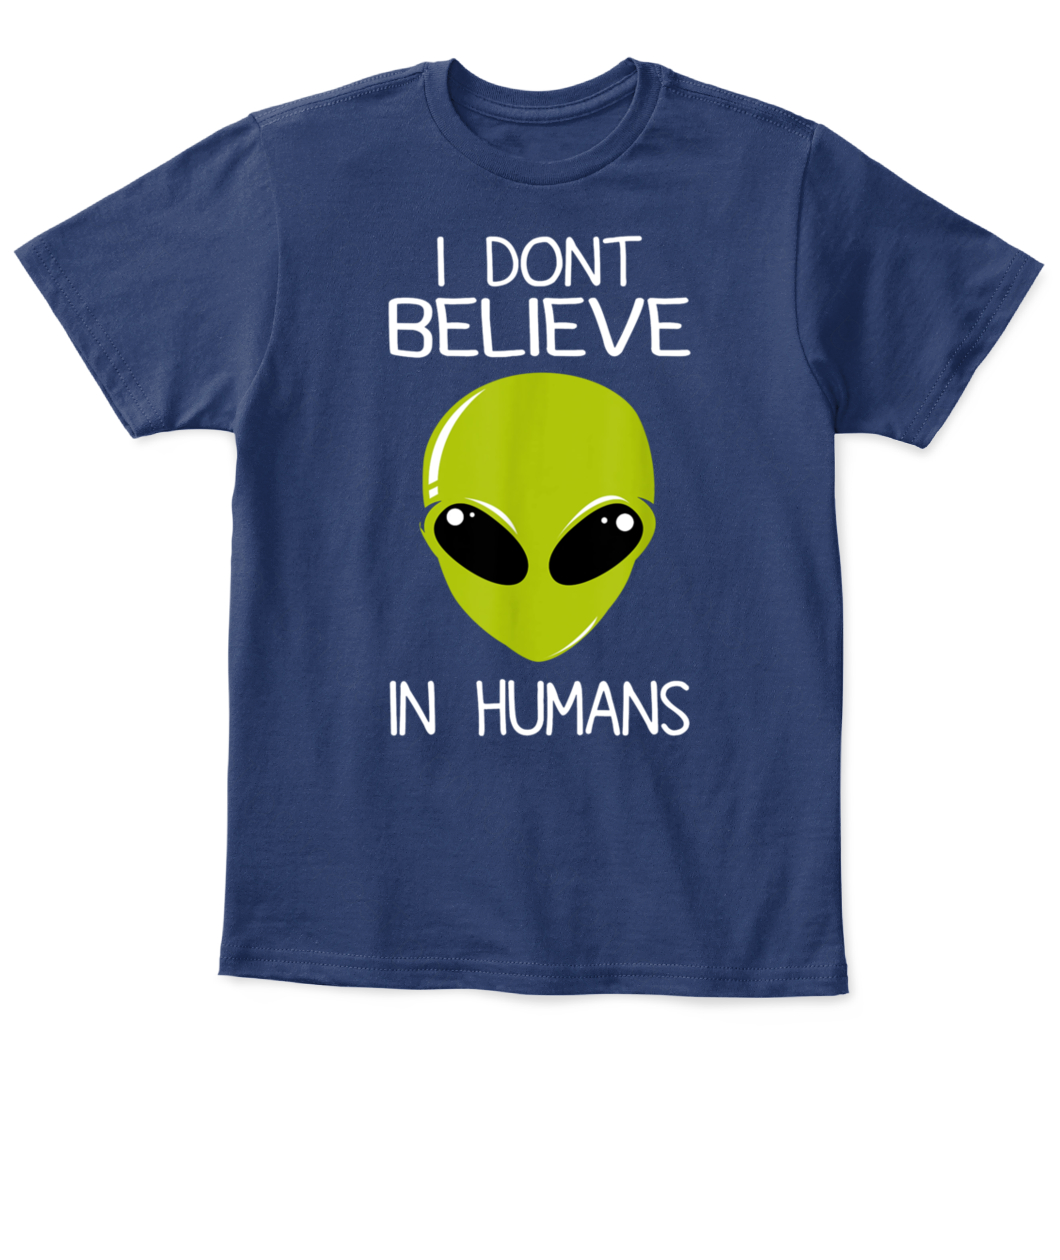 I DON'T BELIEVE IN HUMANS T-SHIRT - Ellie Shirt